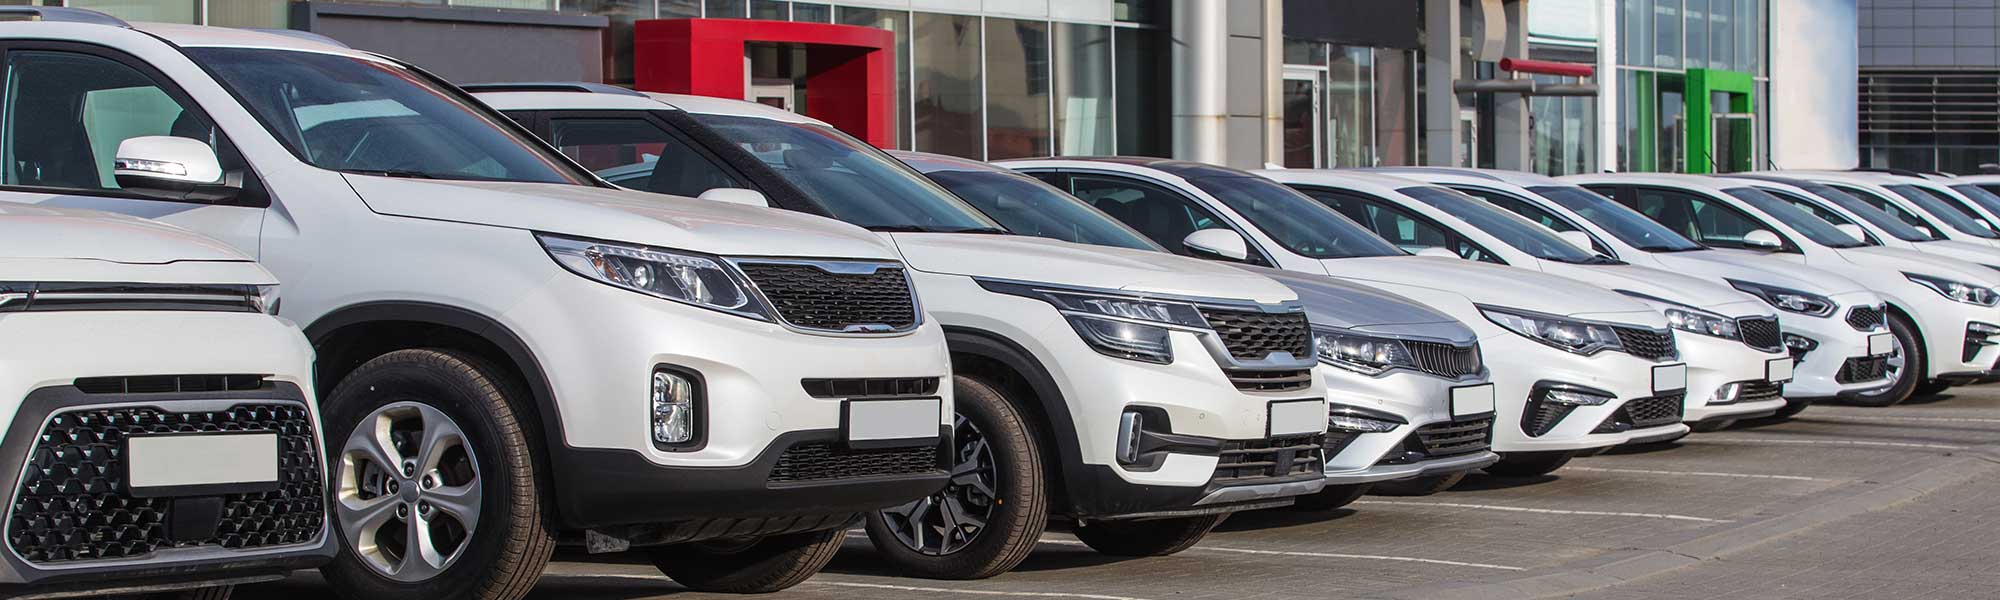 a line up of white cars and SUVs outside a car dealership